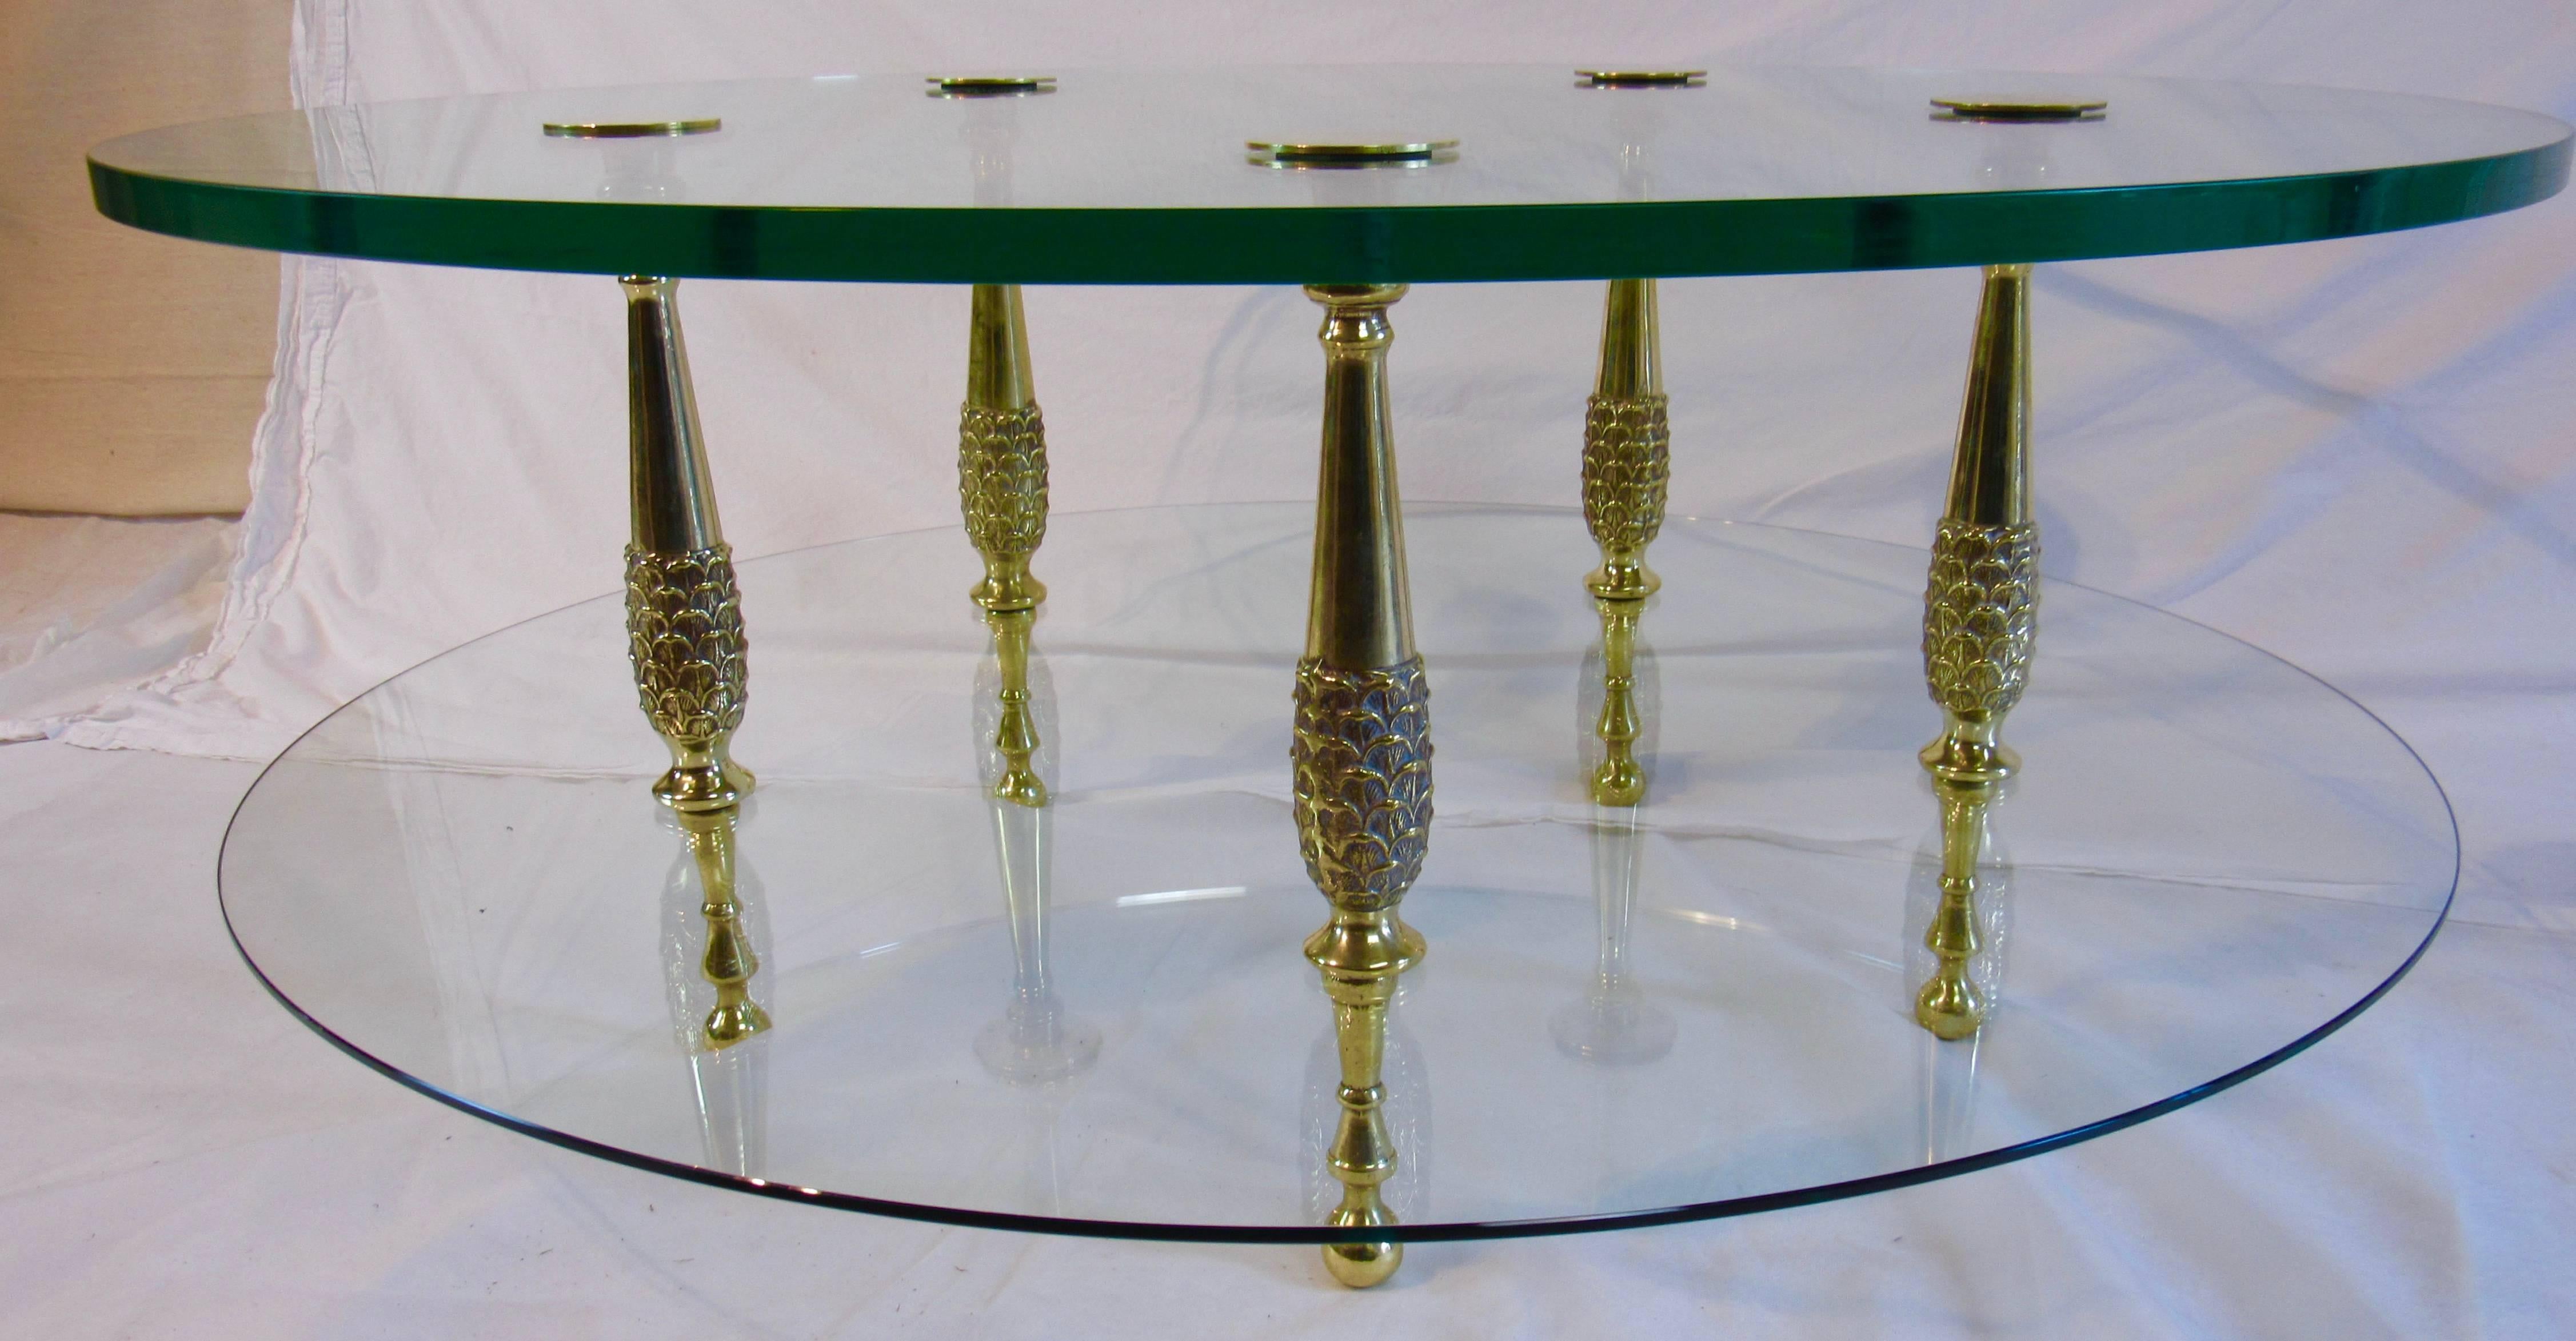 Cast Neoclassical Italian 1950s Circular Polished Bronze and Glass Cocktail Table For Sale